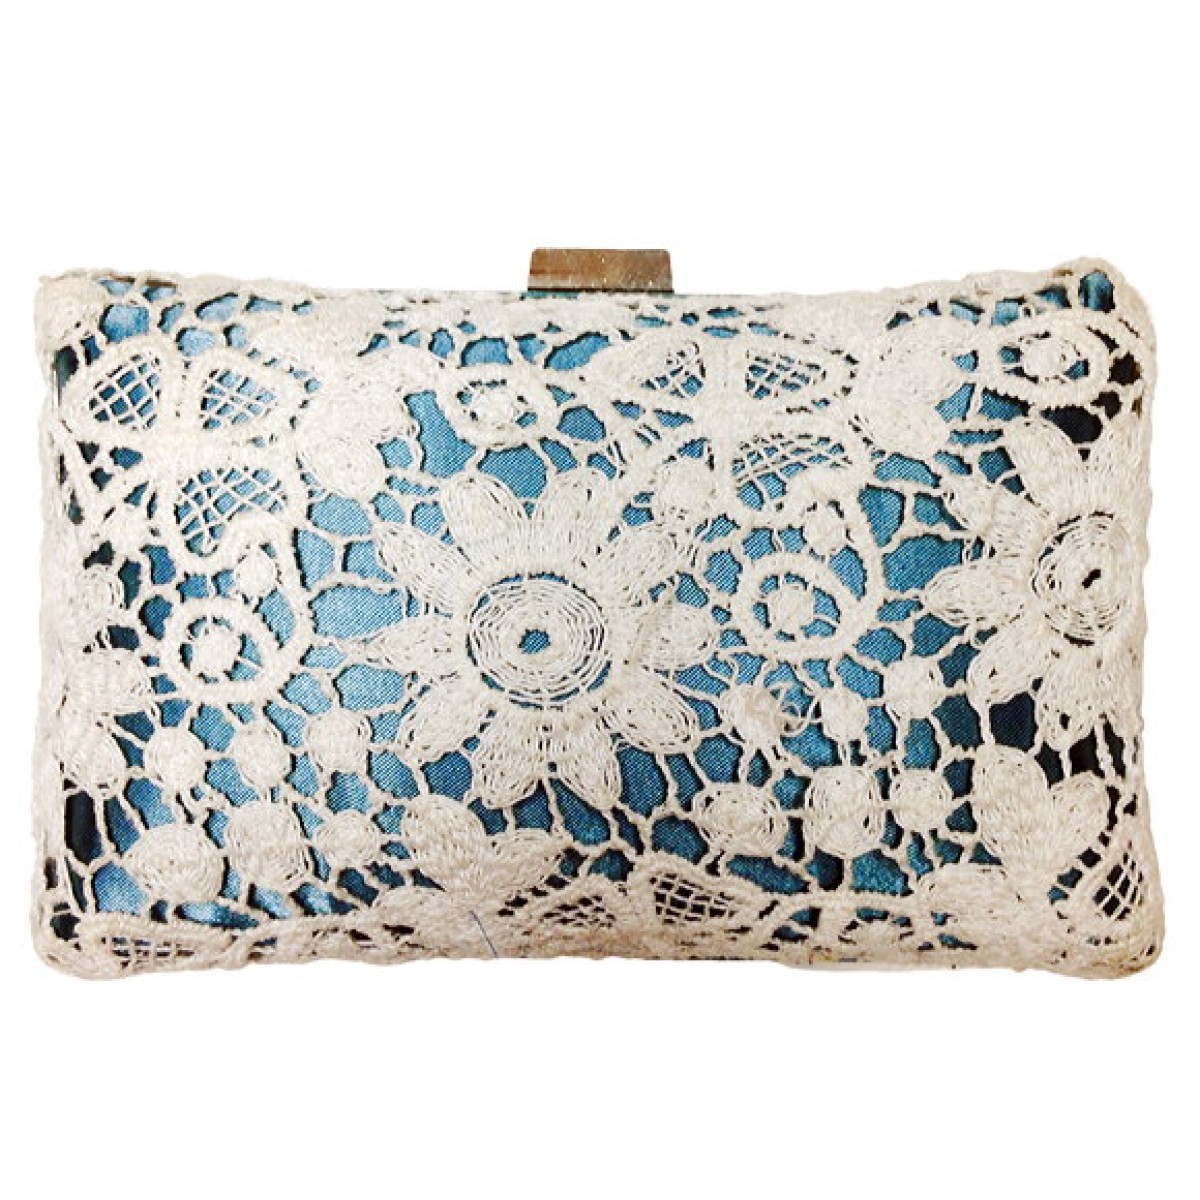 Polyester and Lace Clutch